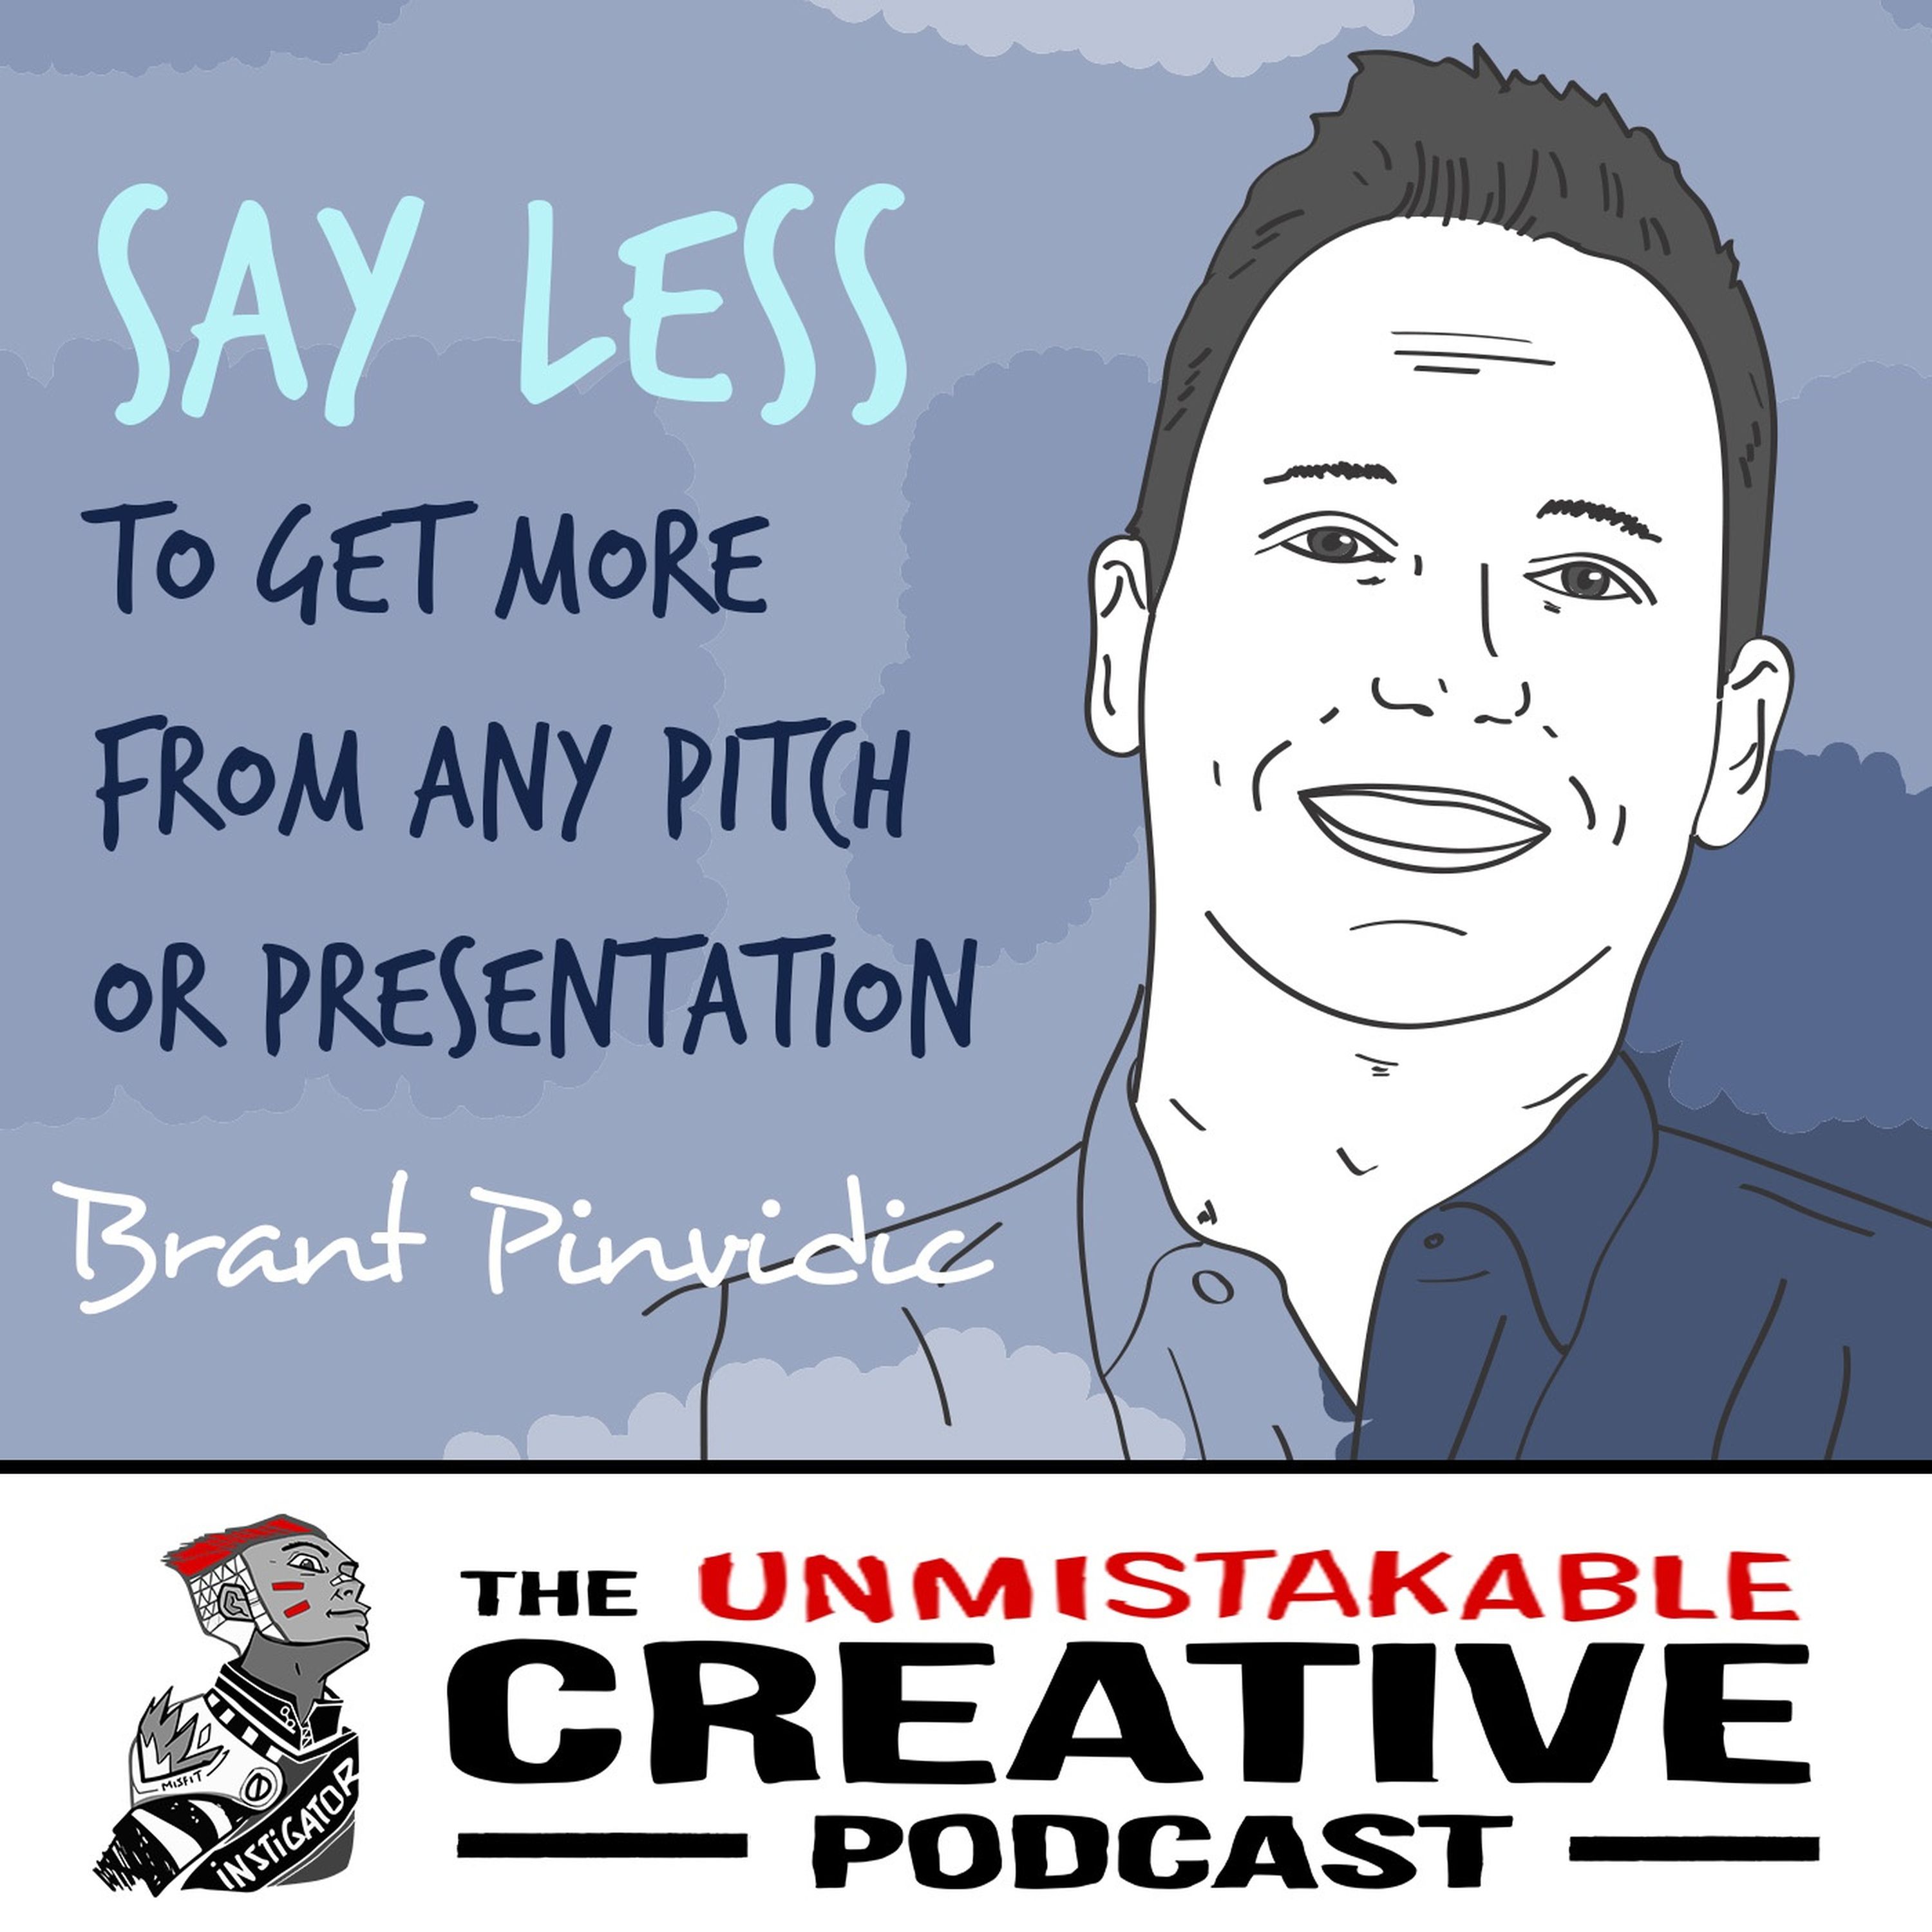 Brant Pinvidic: Say Less to get More from Any Pitch or Presentation Image